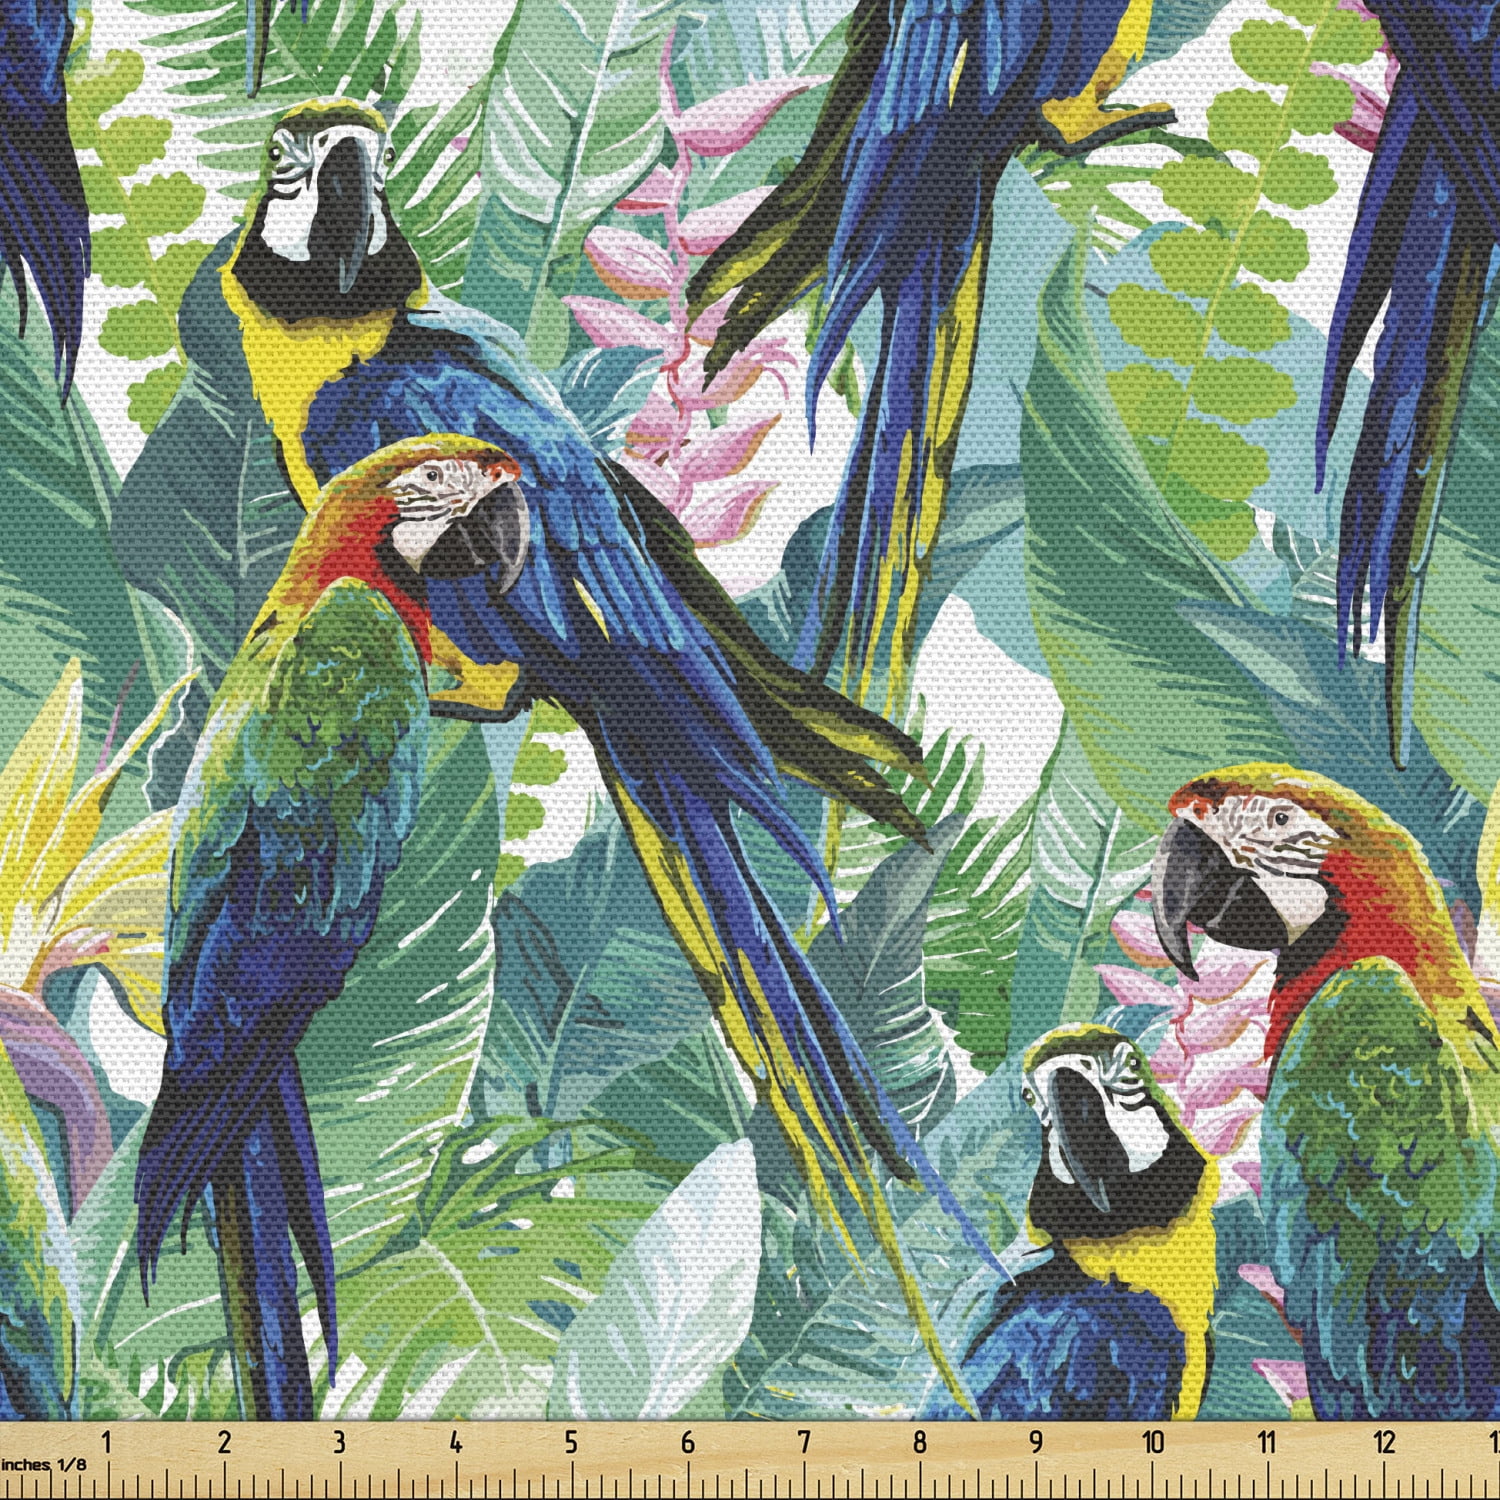 Multicolor Print of Flamingo Birds Along Toucans and Parrots in The Jungle Forest Plants Rectangular Table Cover for Dining Room Kitchen Decor 52 X 70 Ambesonne Exotic Tablecloth 